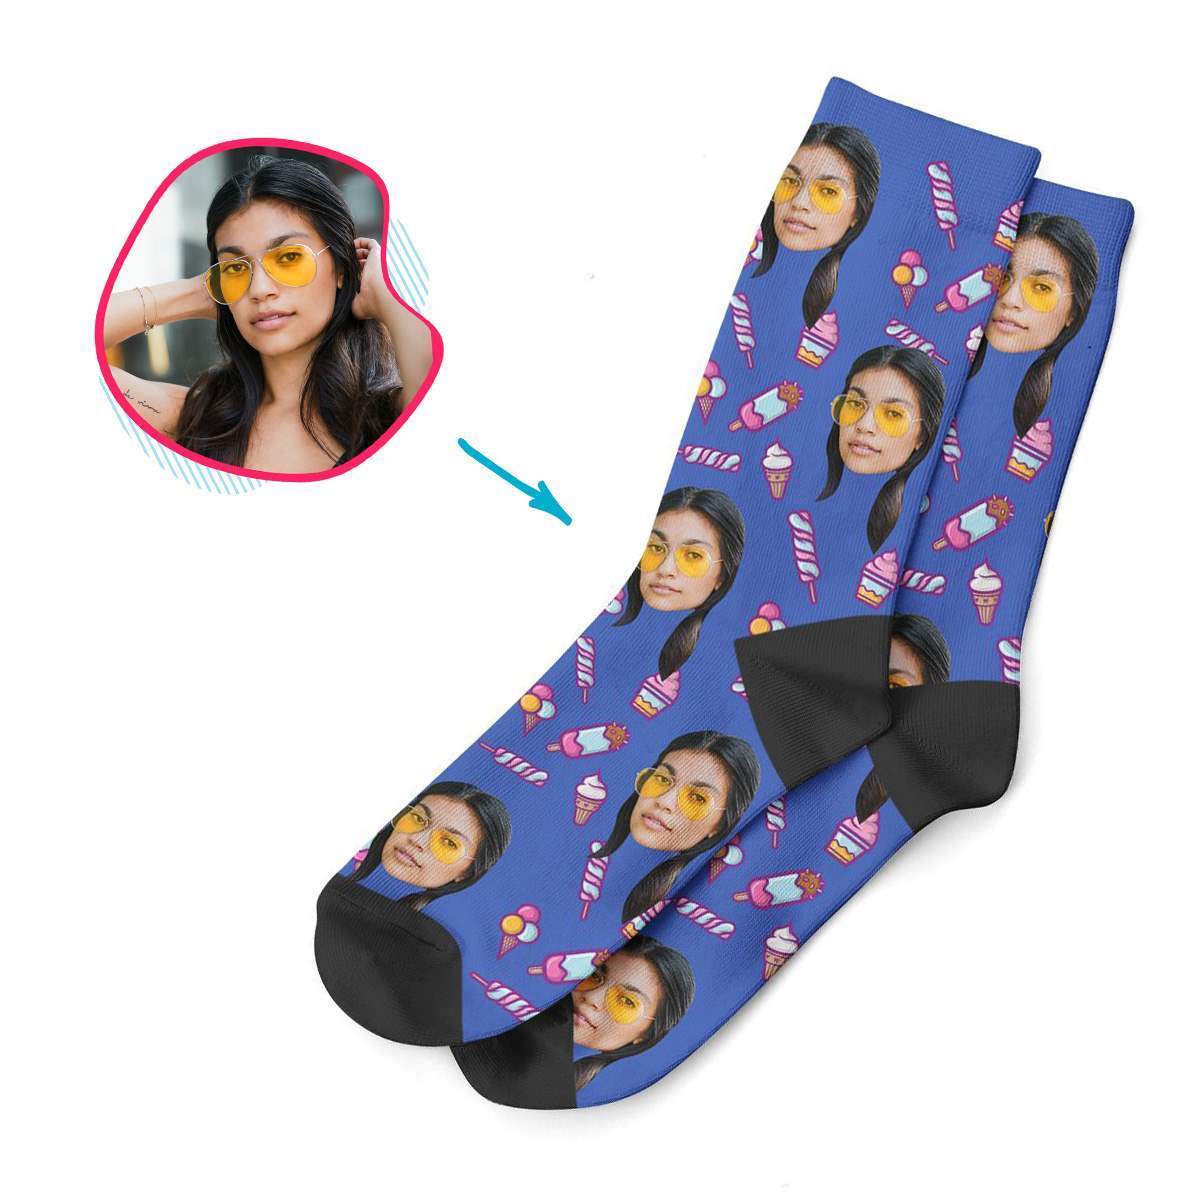 darkblue Candies socks personalized with photo of face printed on them